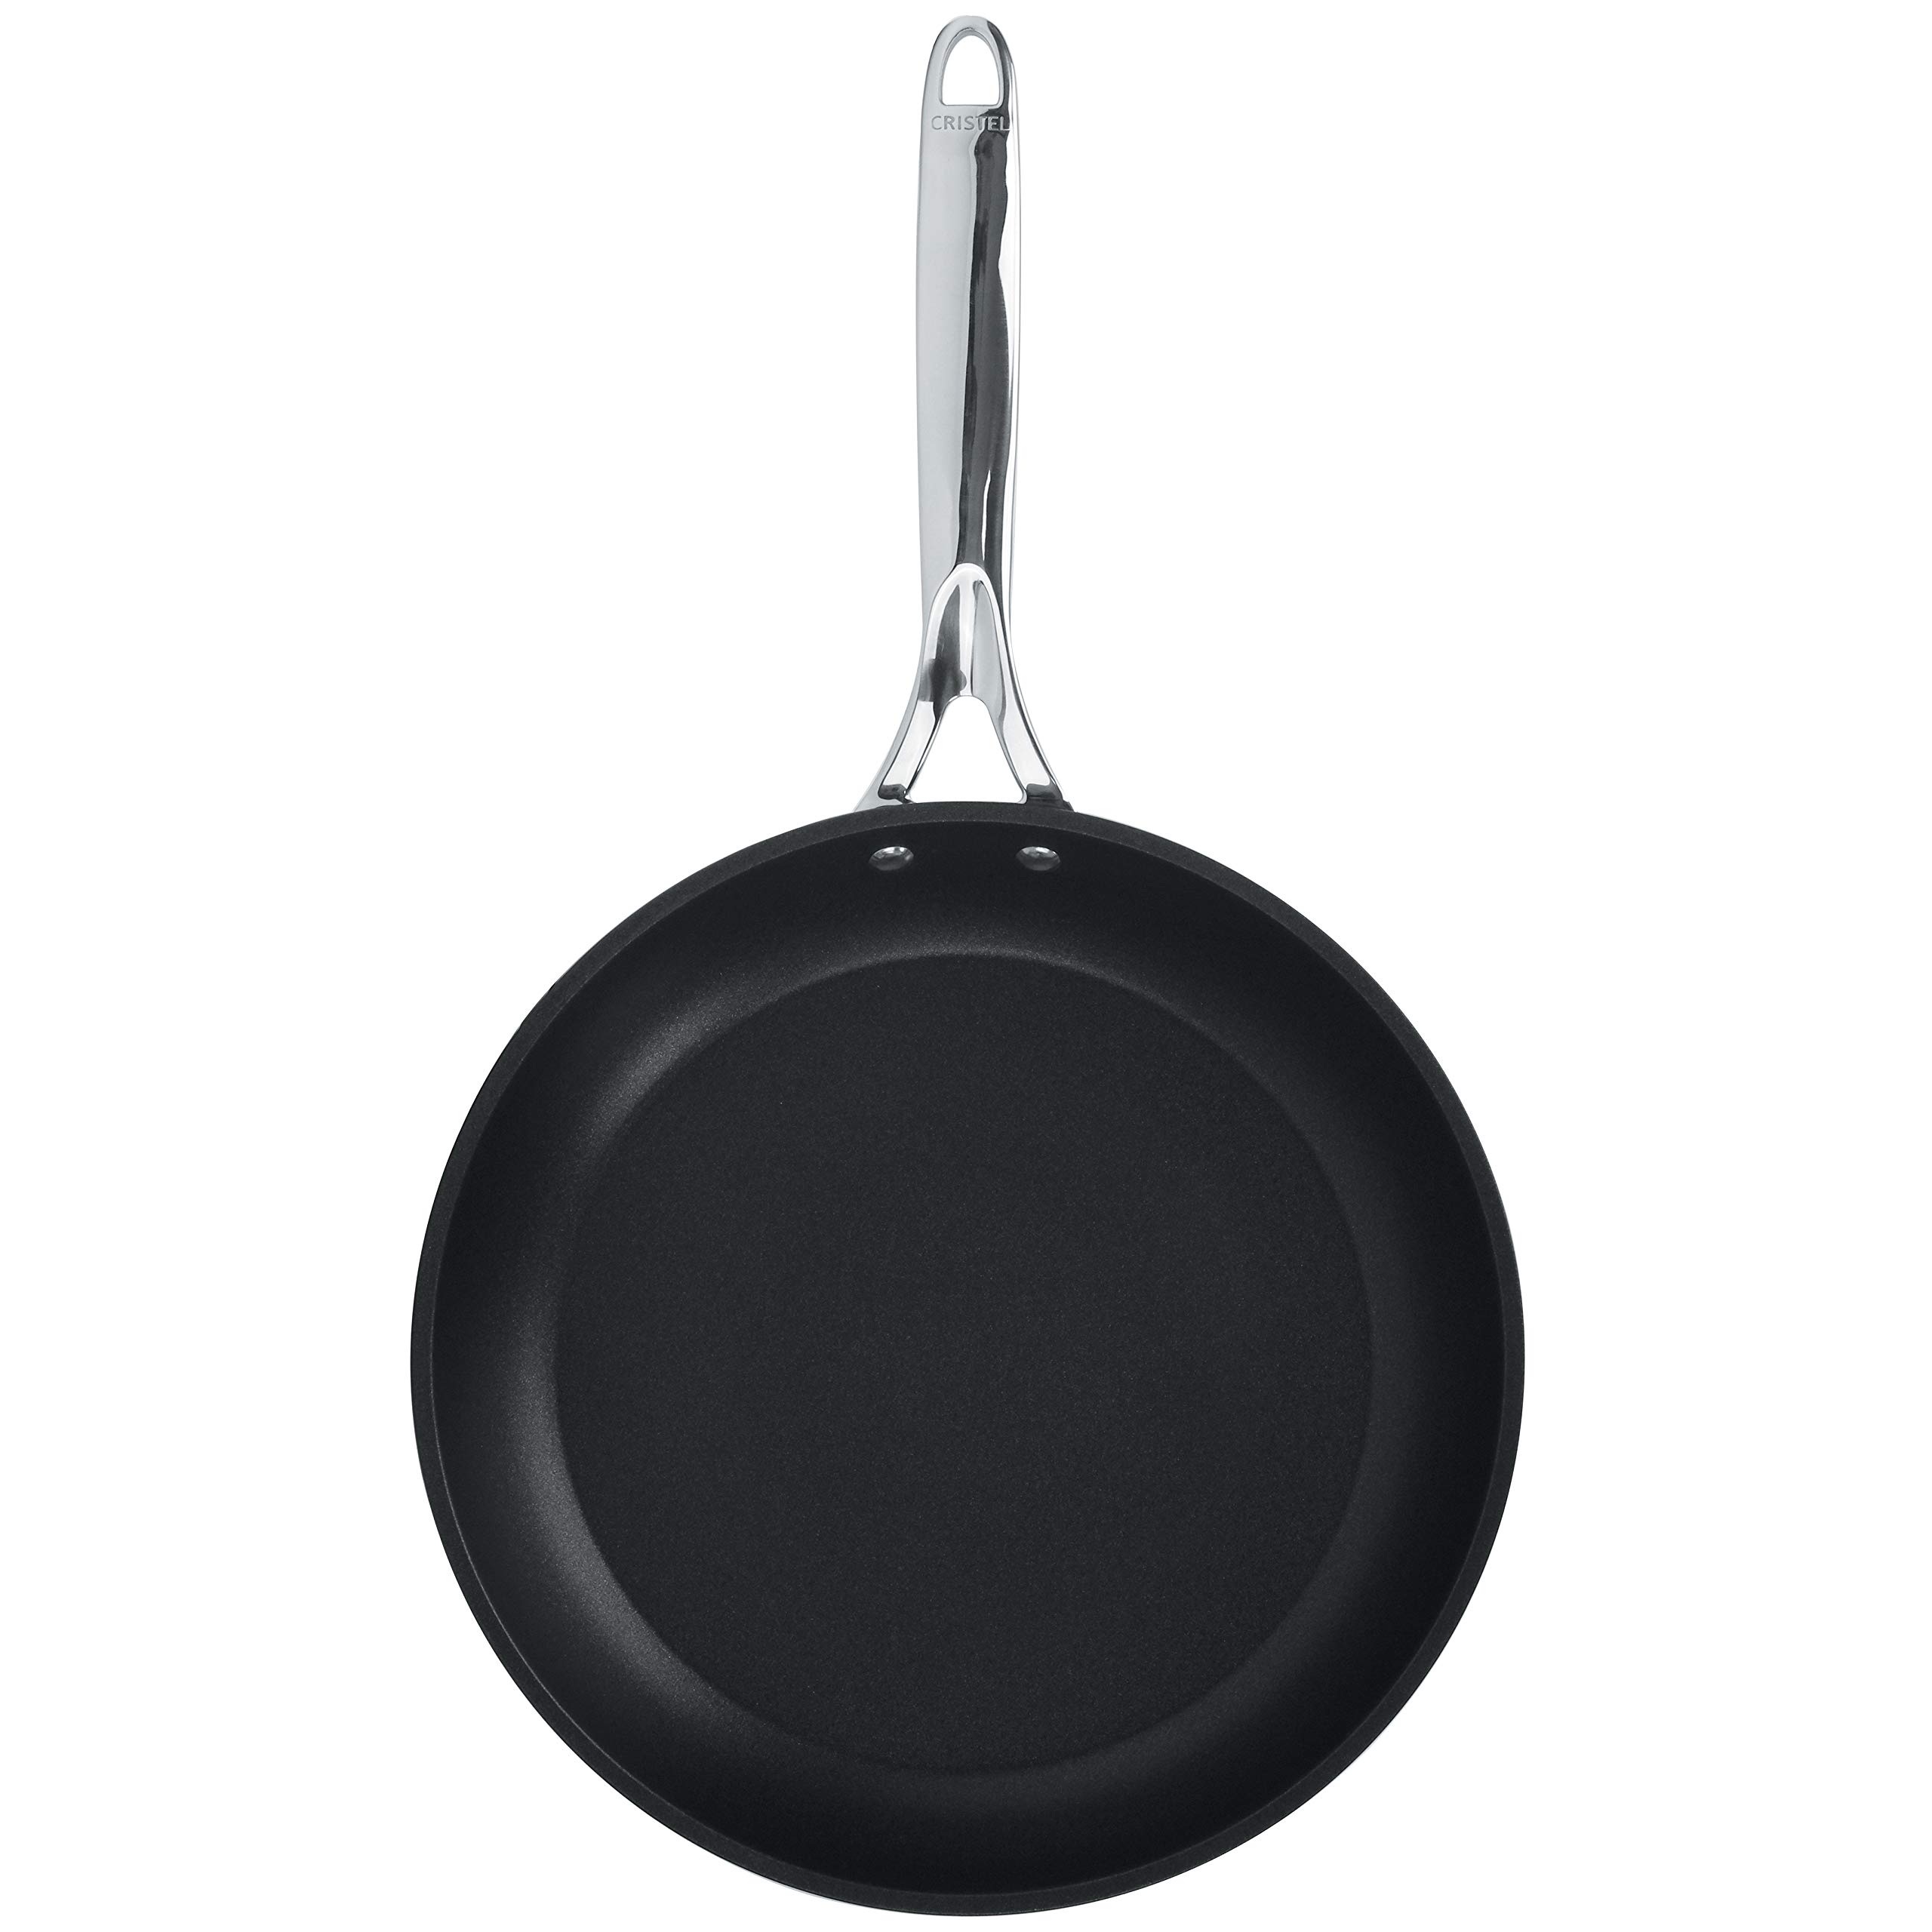 Cristel®, Exceliss+® Non-Stick coating Sauté-pan with anodized aluminum, Long Handle, 3-Ply construction, Brushed Finish, all hobs + induction, Castel'Pro® Ultralu® collection, 2Qt.